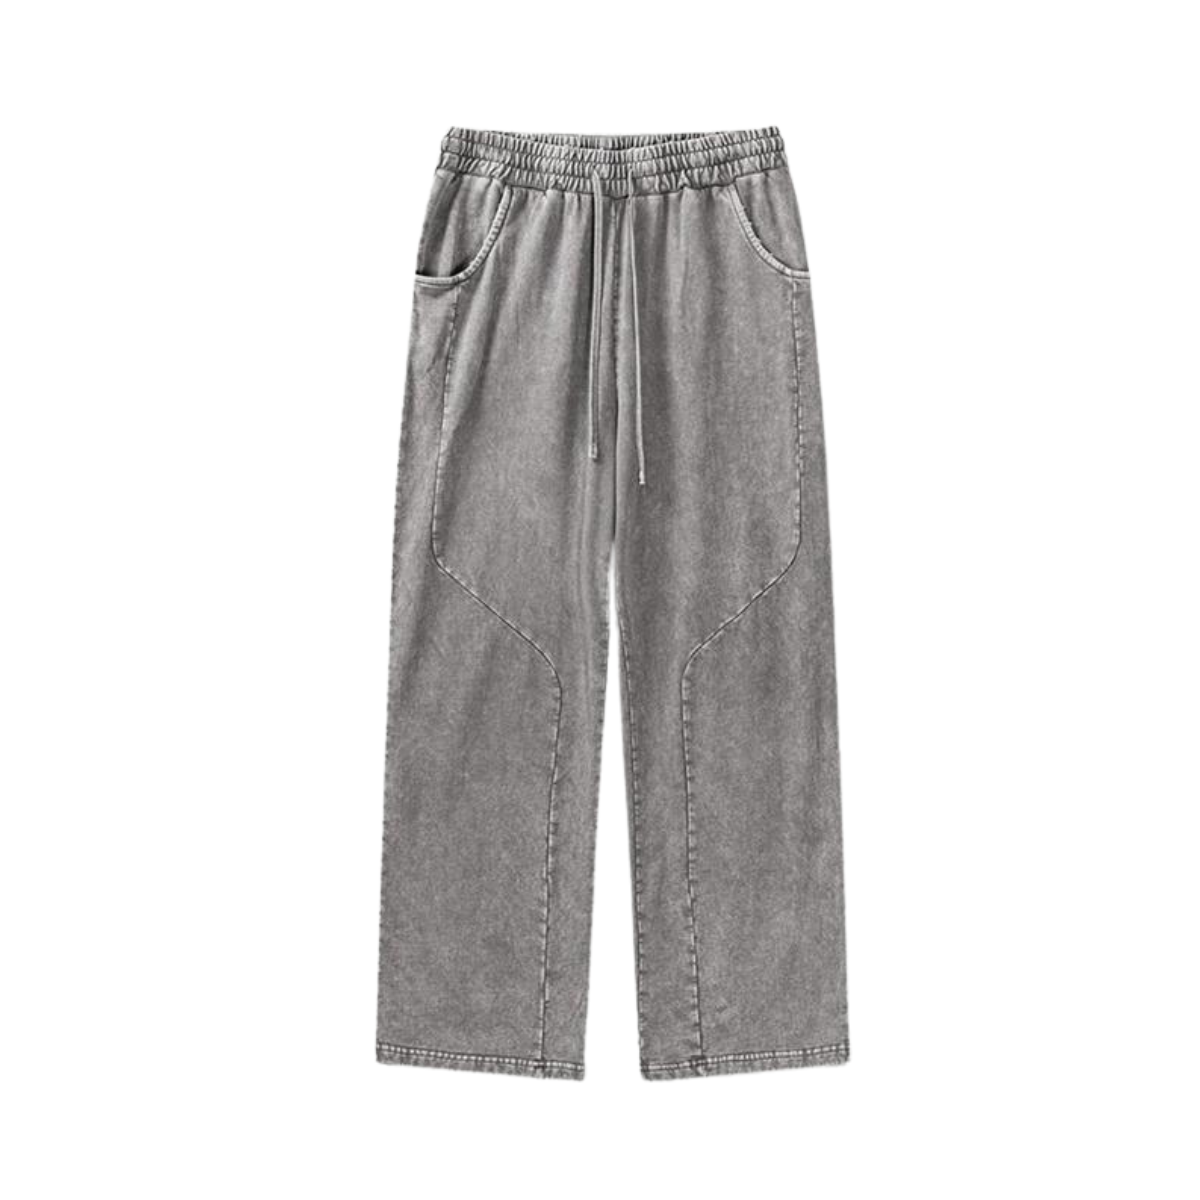 Primo Patchwork Sweatpants - Primo Collection 